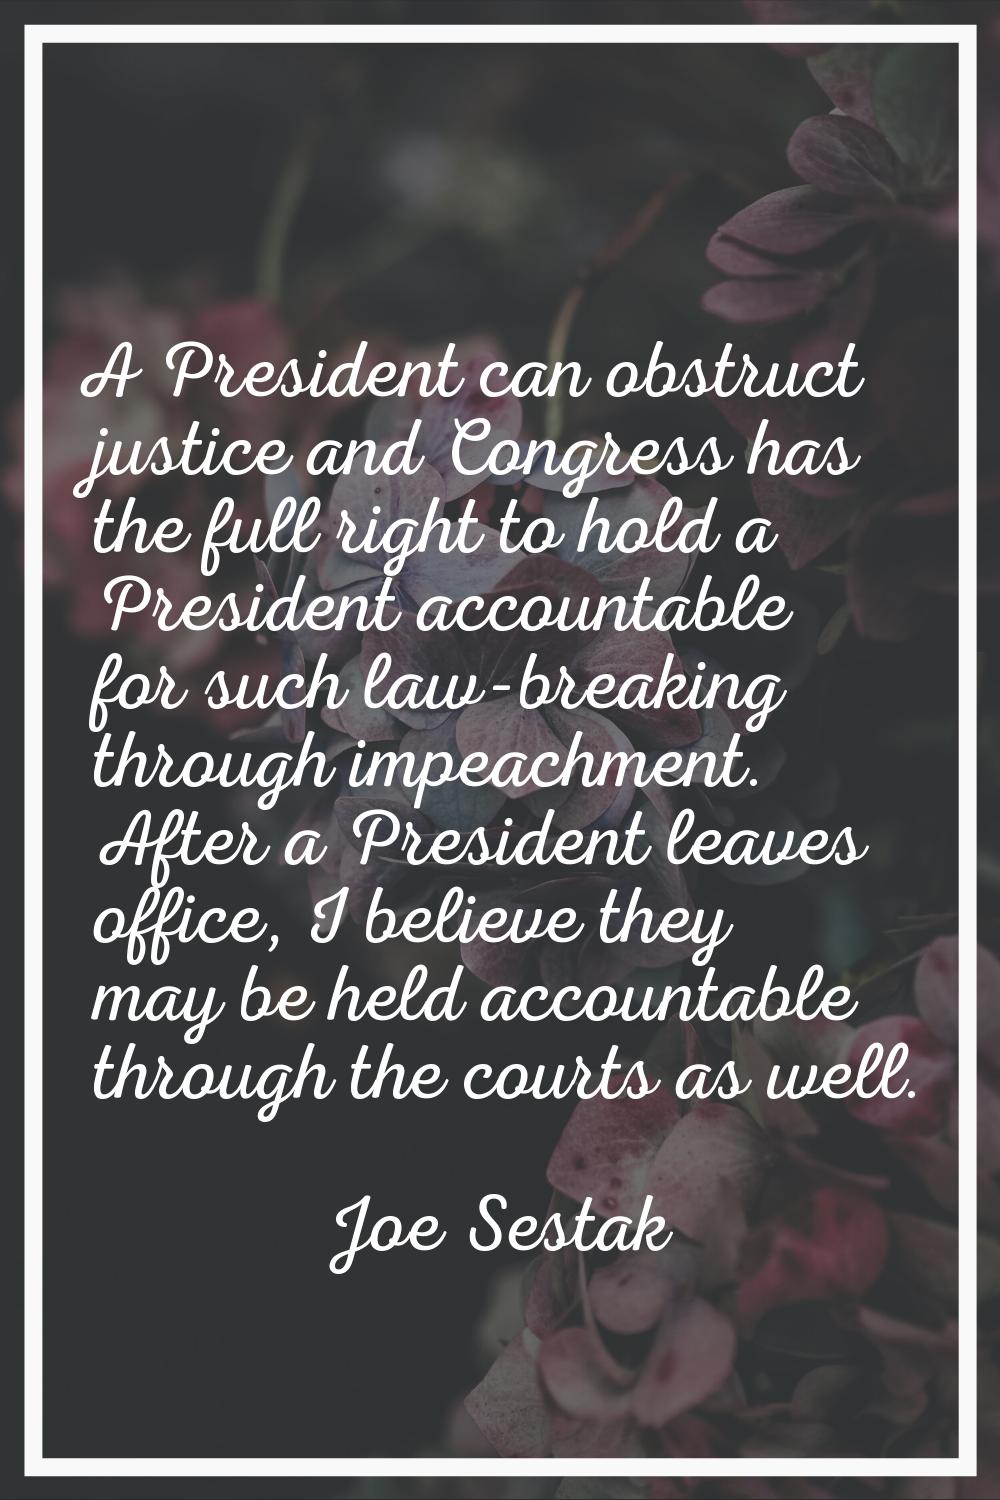 A President can obstruct justice and Congress has the full right to hold a President accountable fo